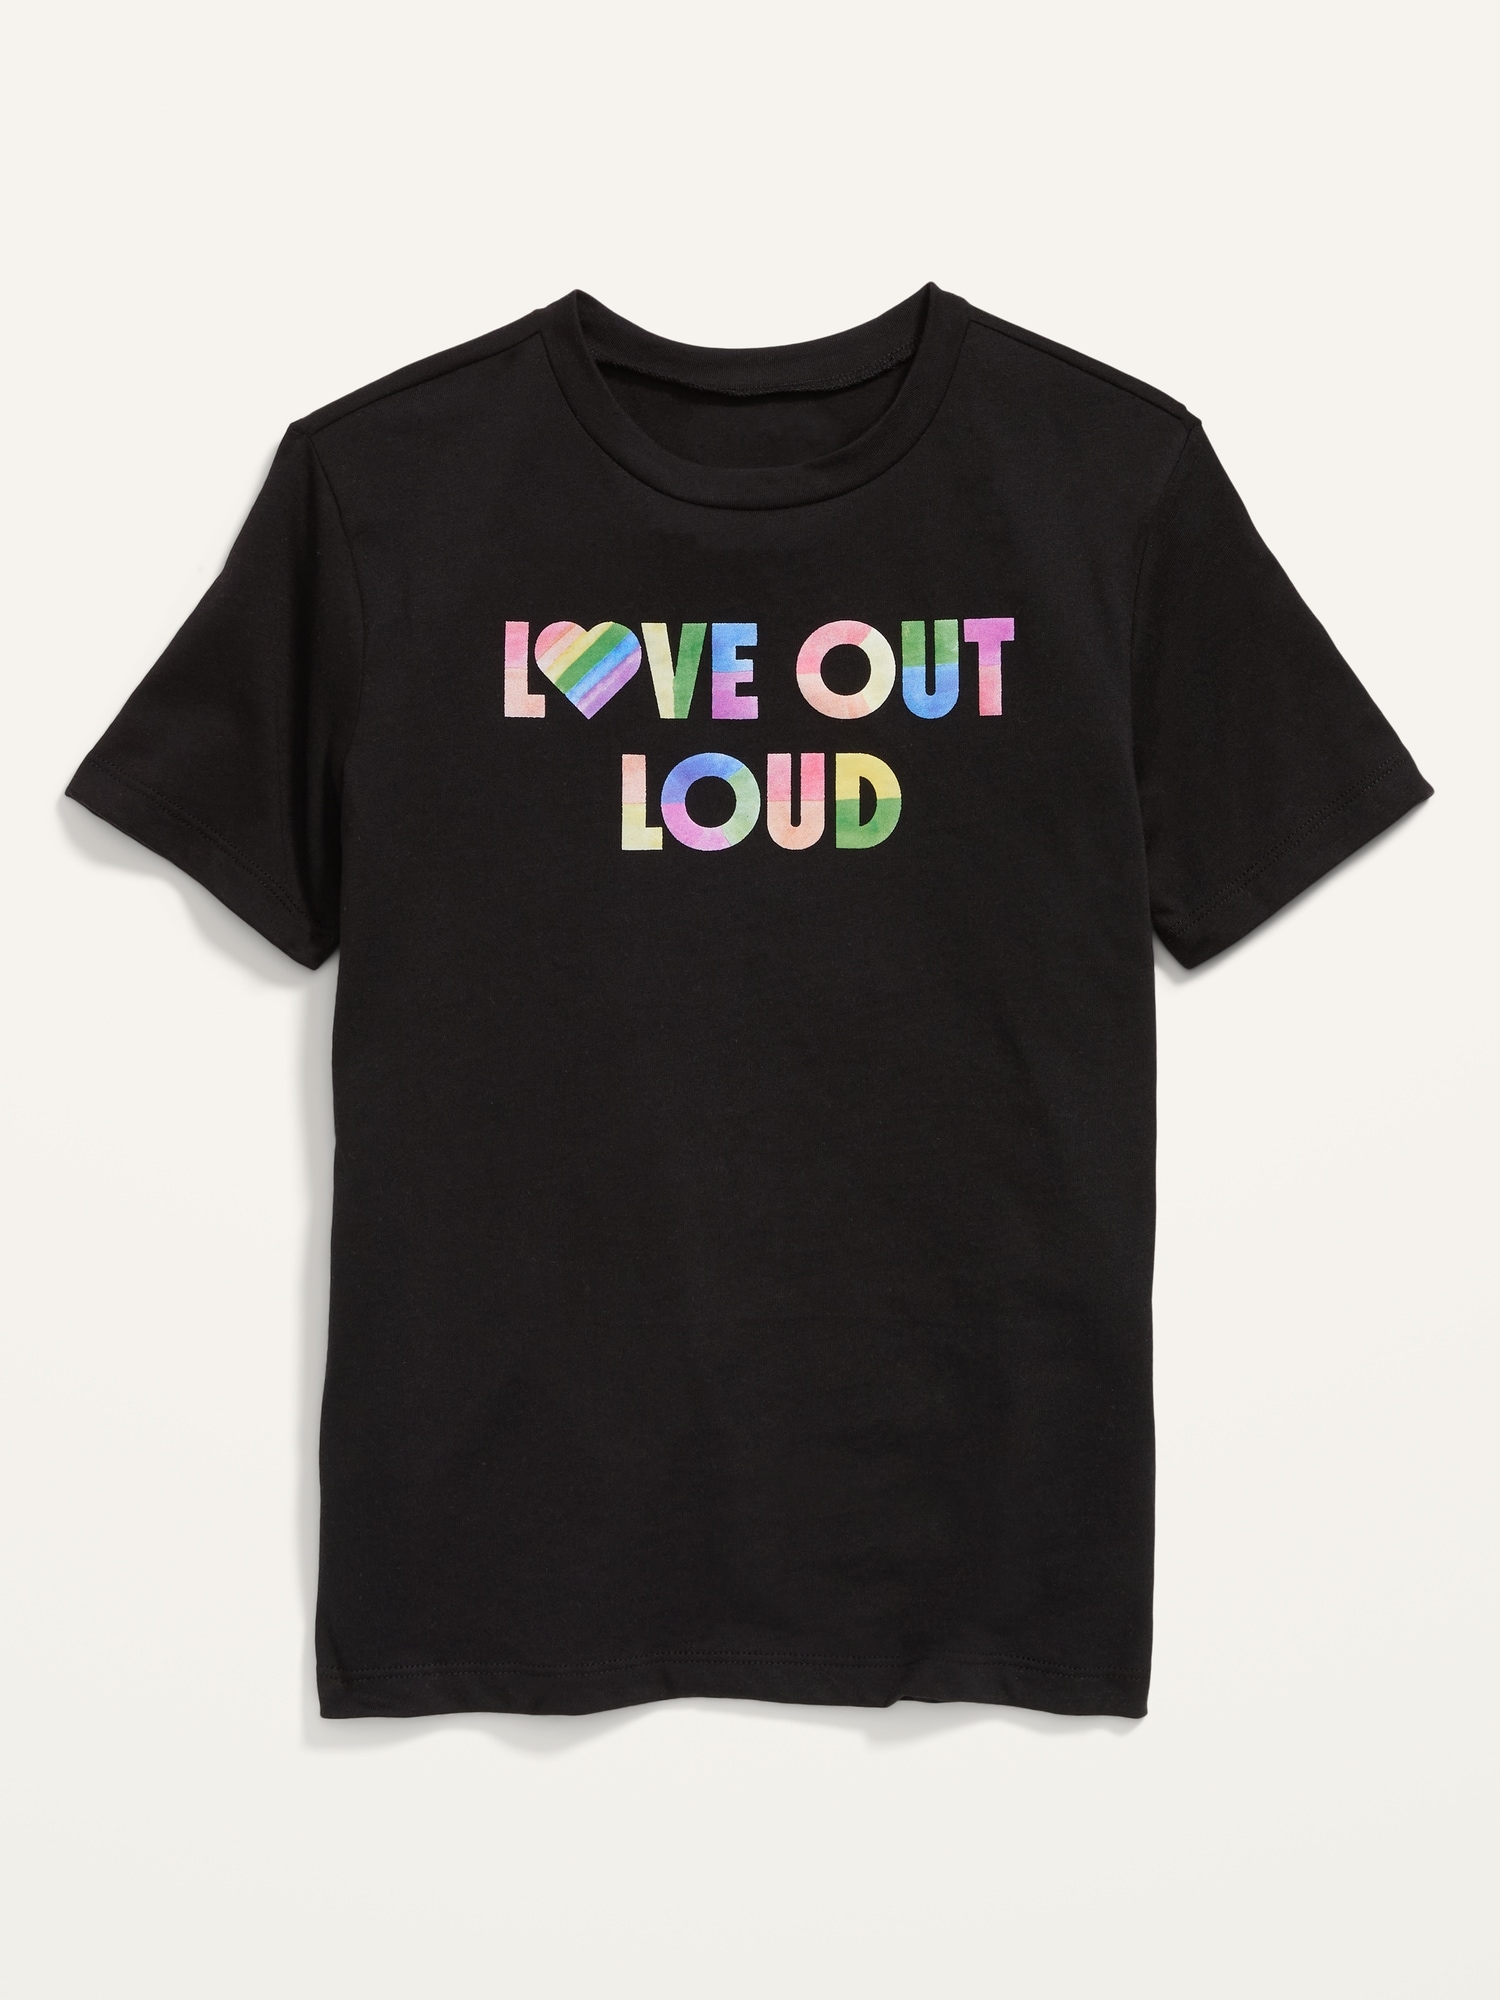 Gender-Neutral Matching Pride T-Shirt for Kids | Old Navy